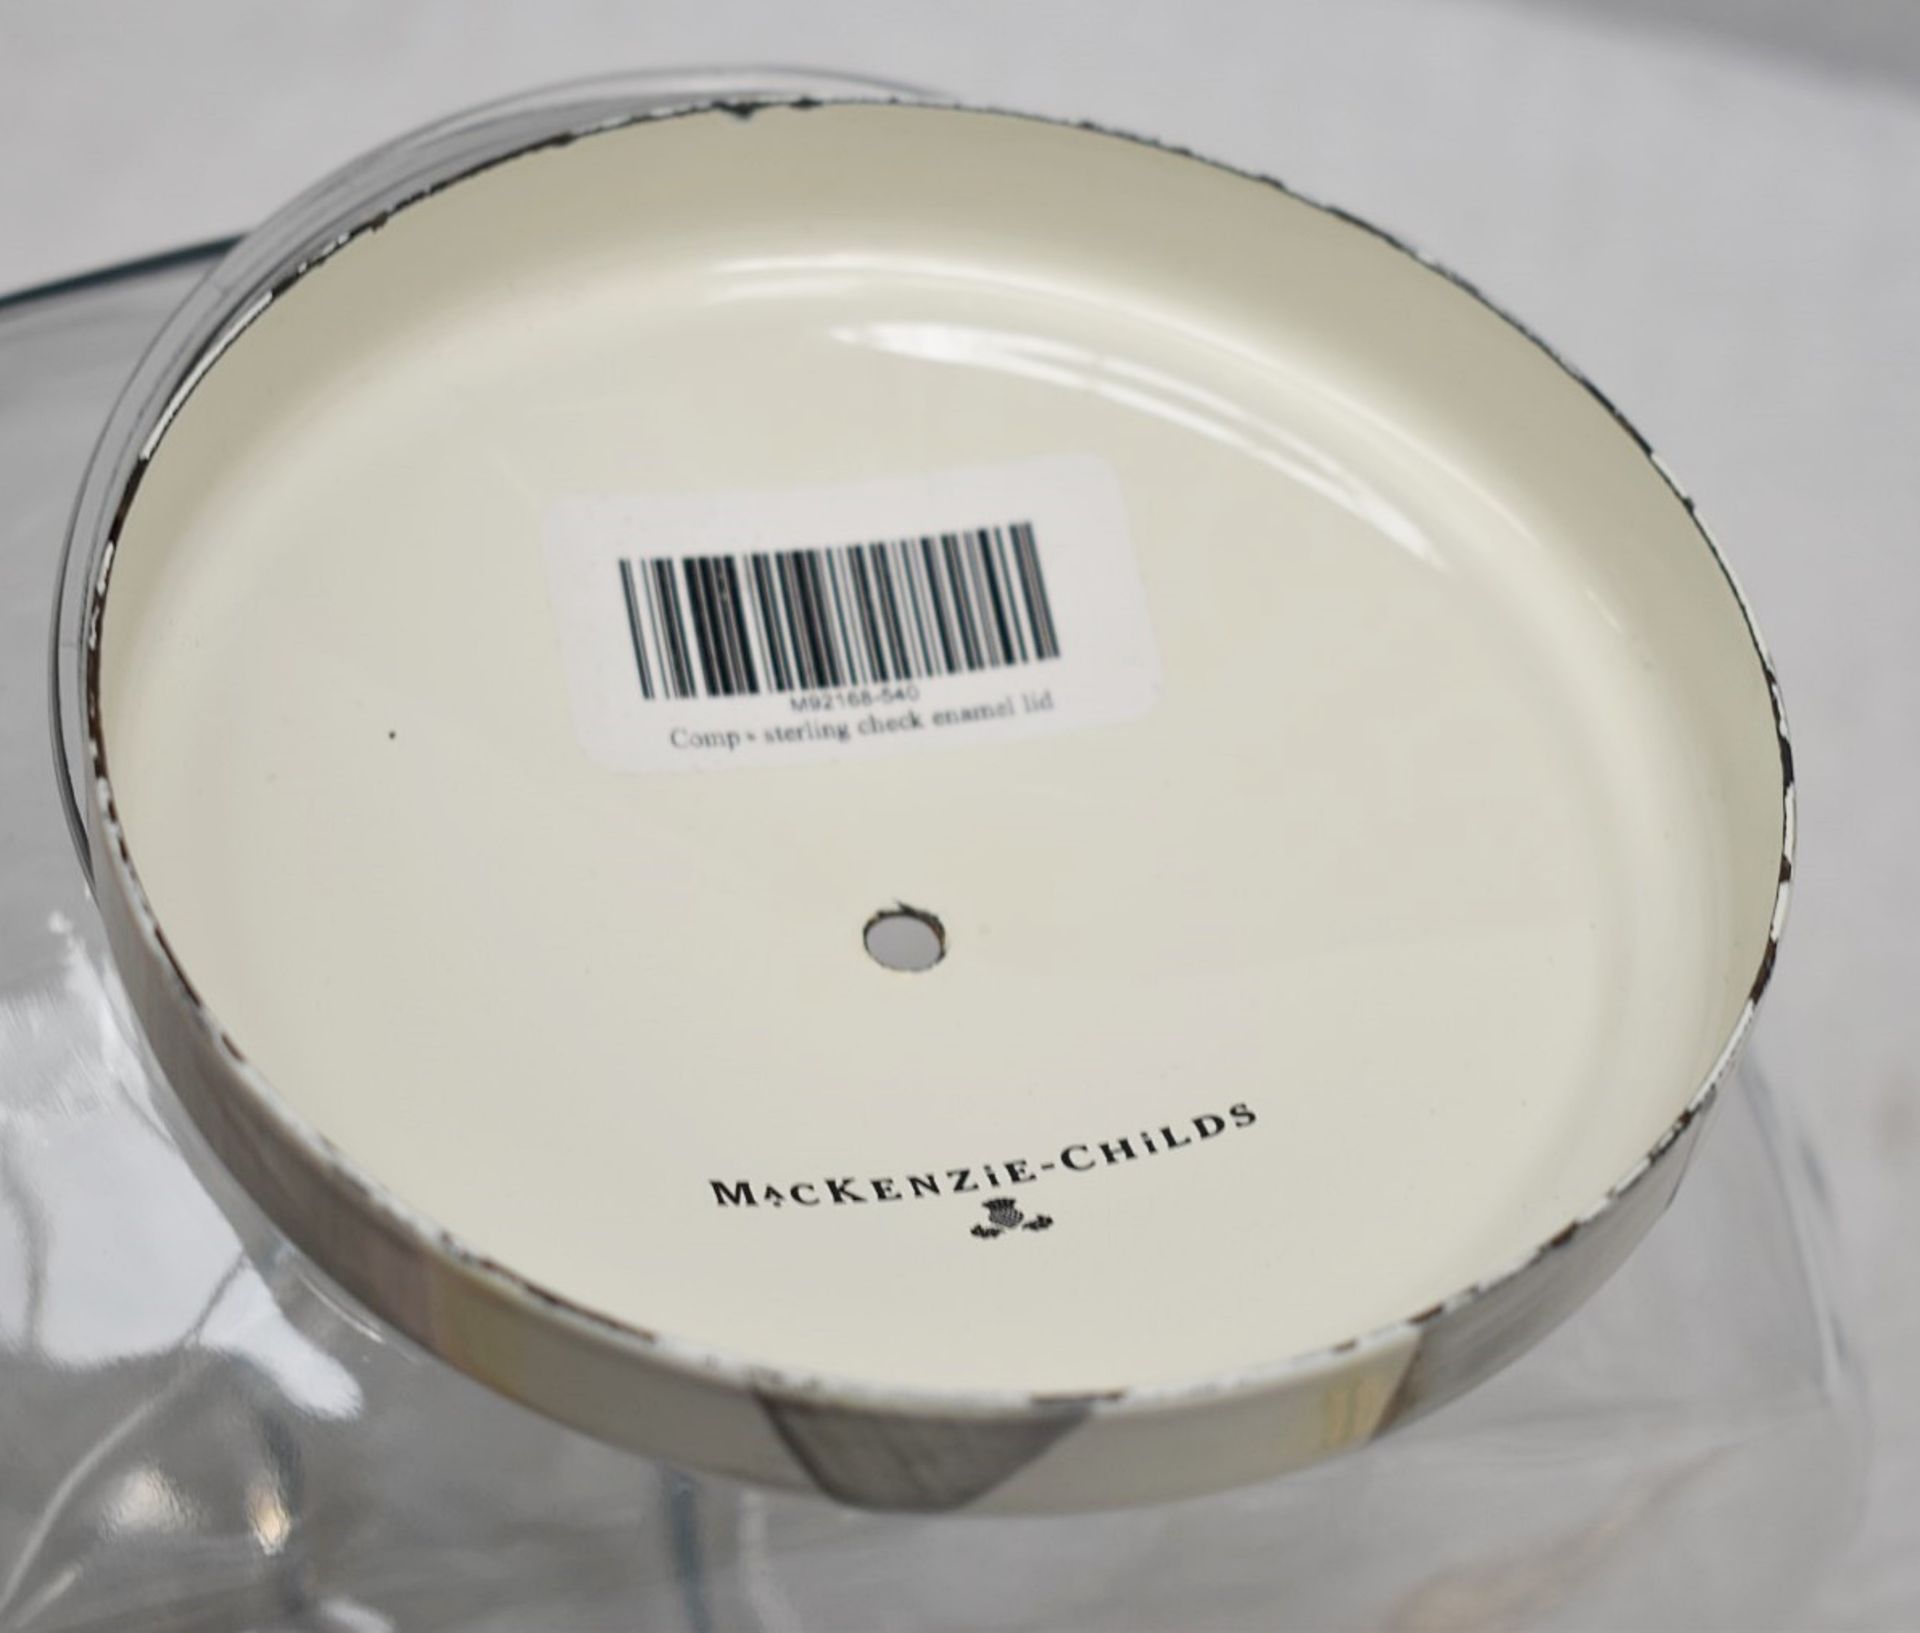 1 x MACKENZIE-CHILDS Sterling Check Cookie Jar With Enamelware Lid (20cm) - Original Price £94.95 - Image 10 of 12